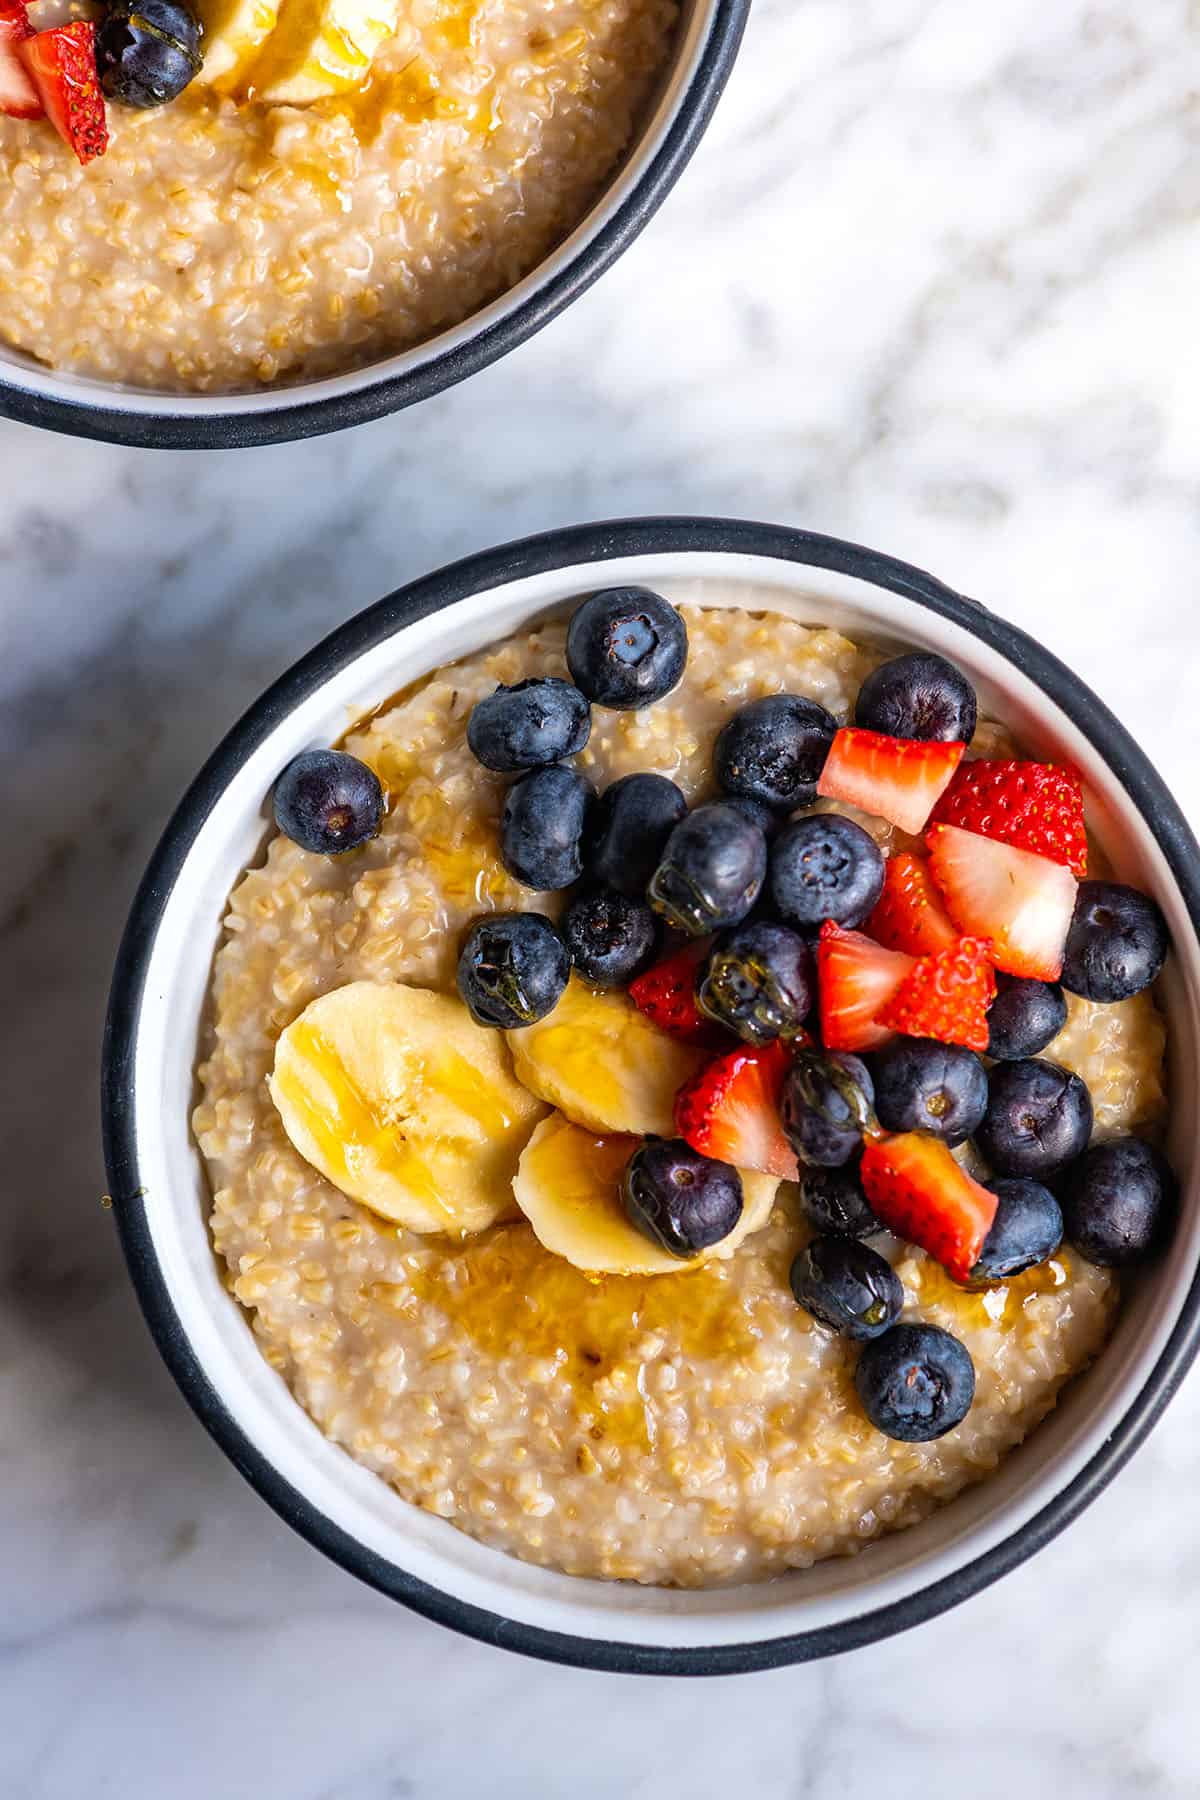 Bowls of creamy steel cut oats with berries and banana on top